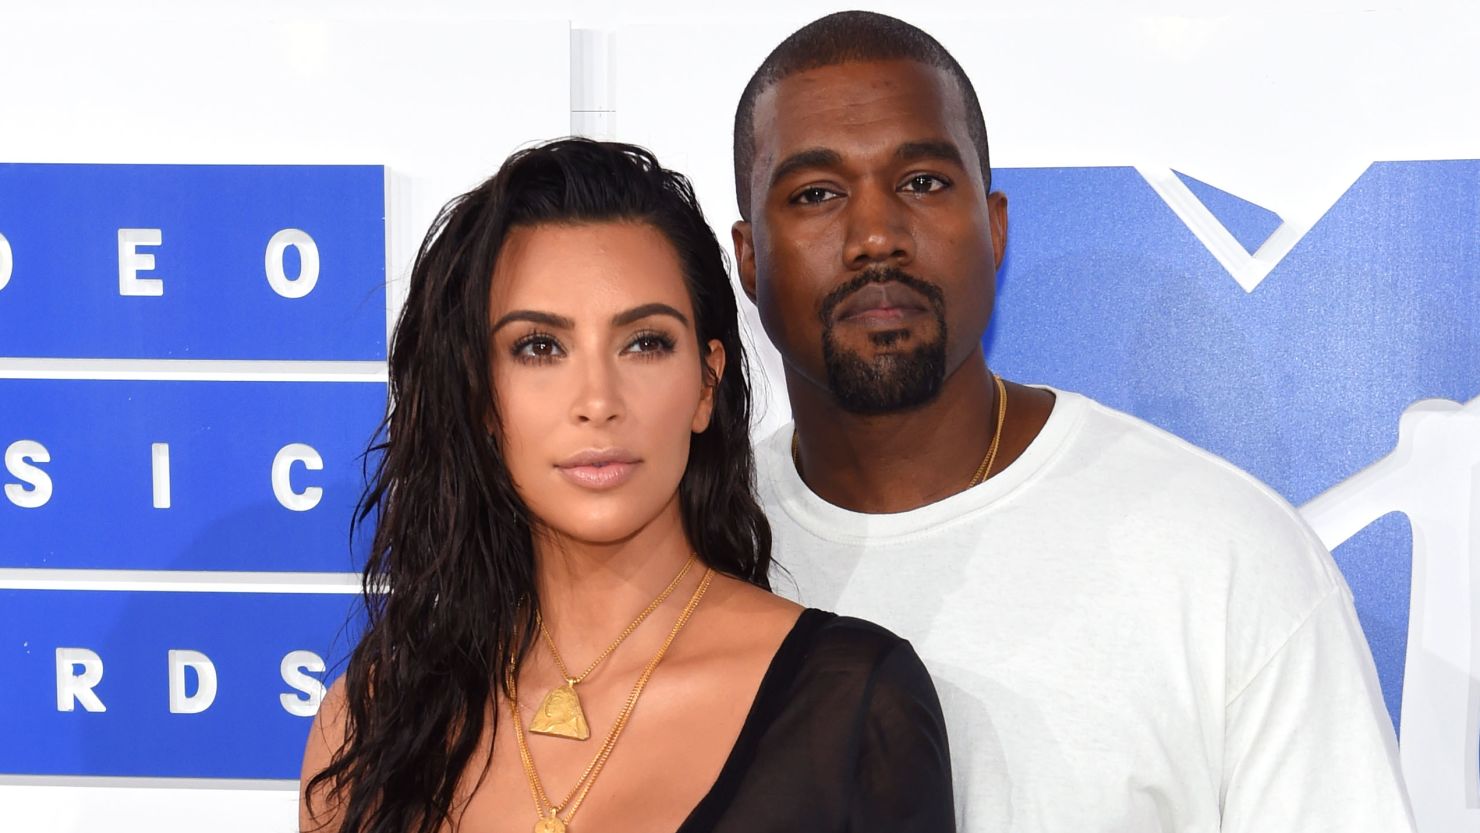 Kanye West and Kim Kardashian West attend the 2016 MTV Video Music Awards at Madison Square Garden on August 28, 2016 in New York City.  